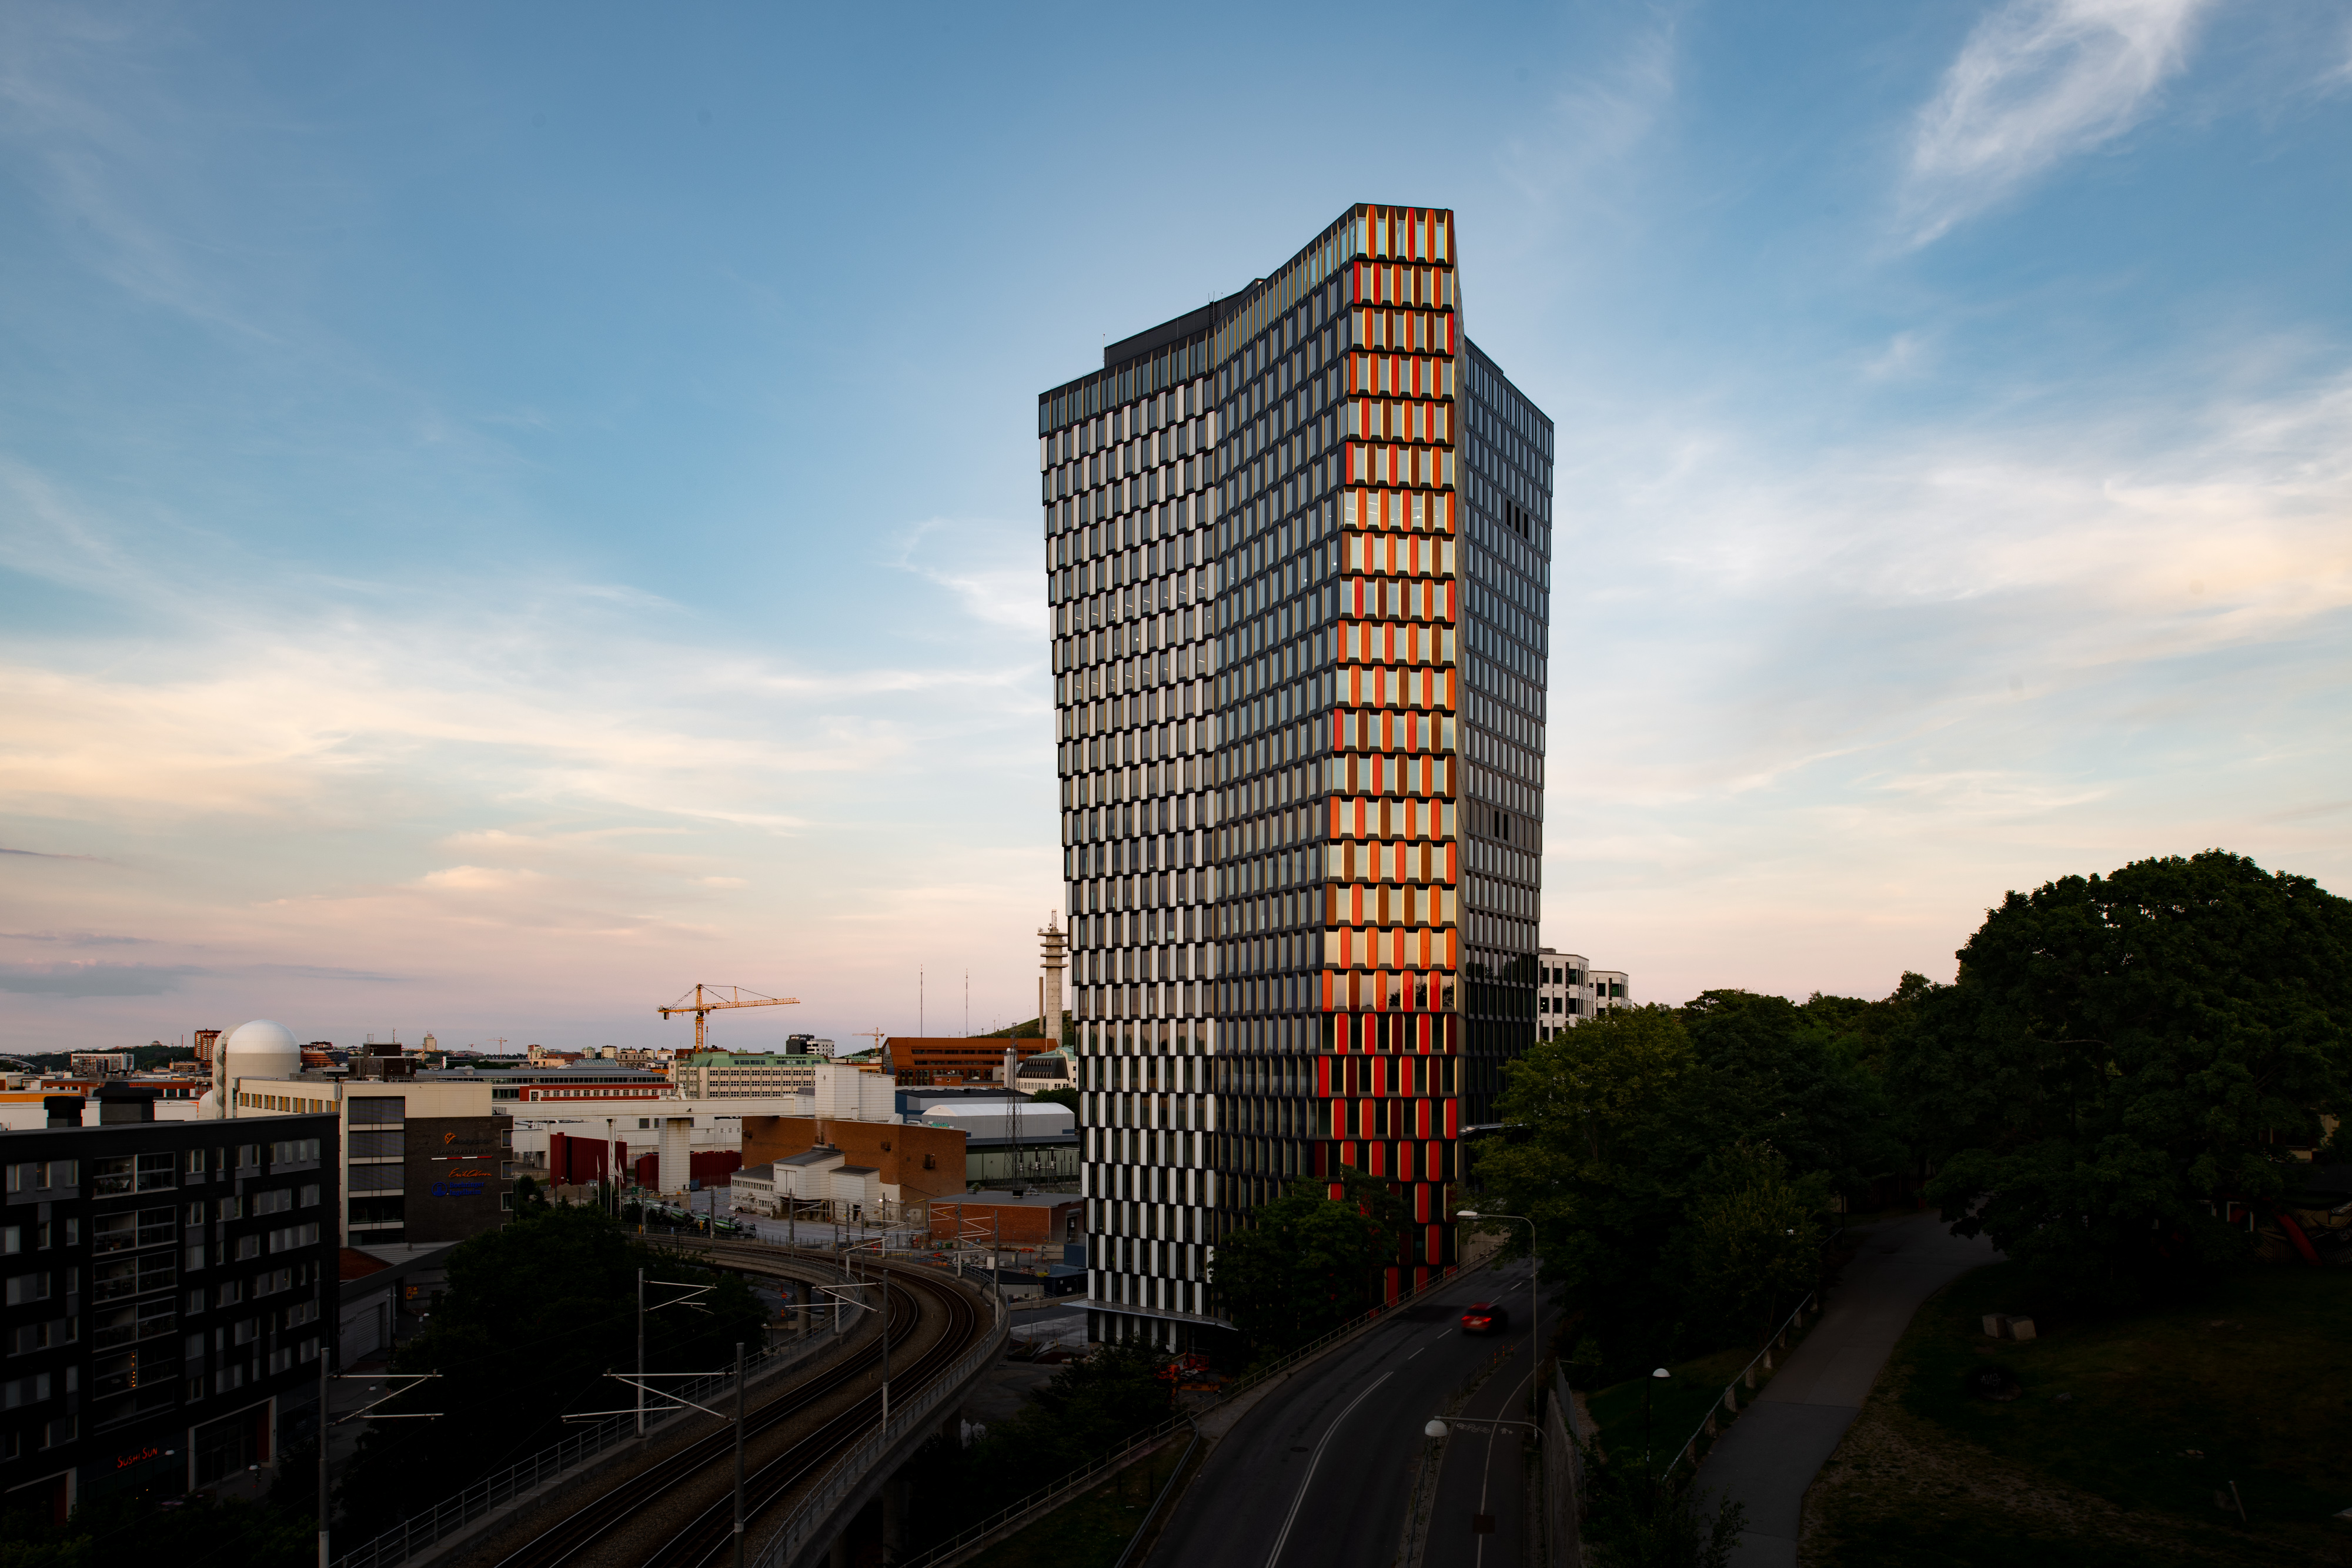 Sthlm 01 – A new landmark in Stockholm gained the outstanding green building certification